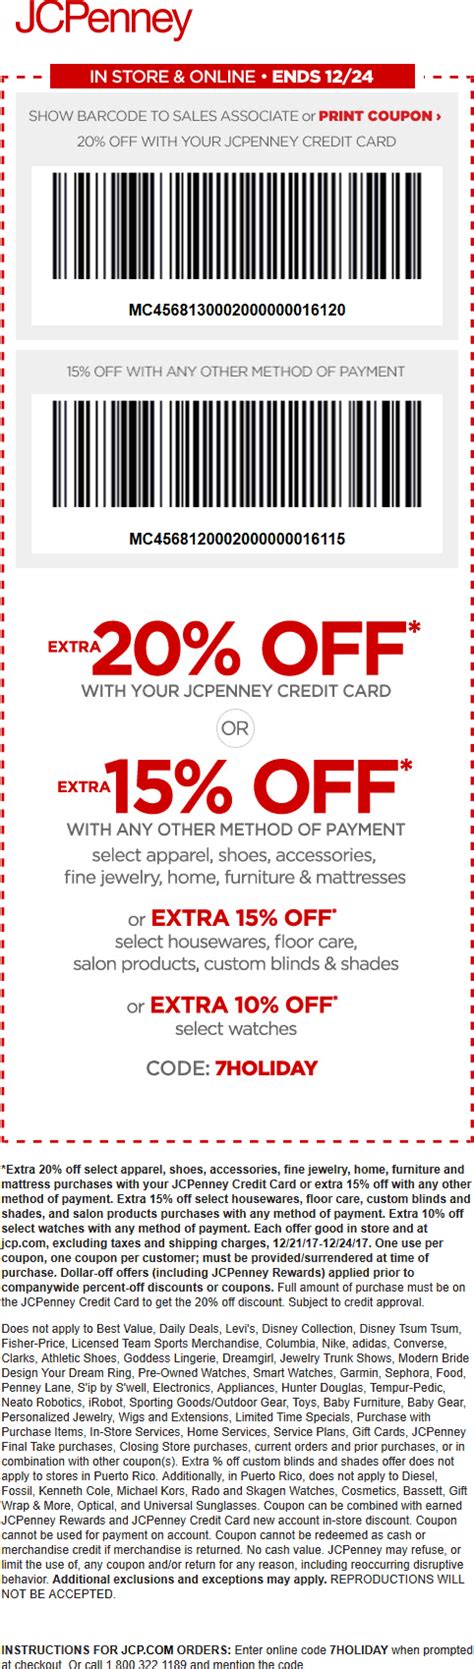 Click on the add text icon 3. JCPenney October 2020 Coupons and Promo Codes